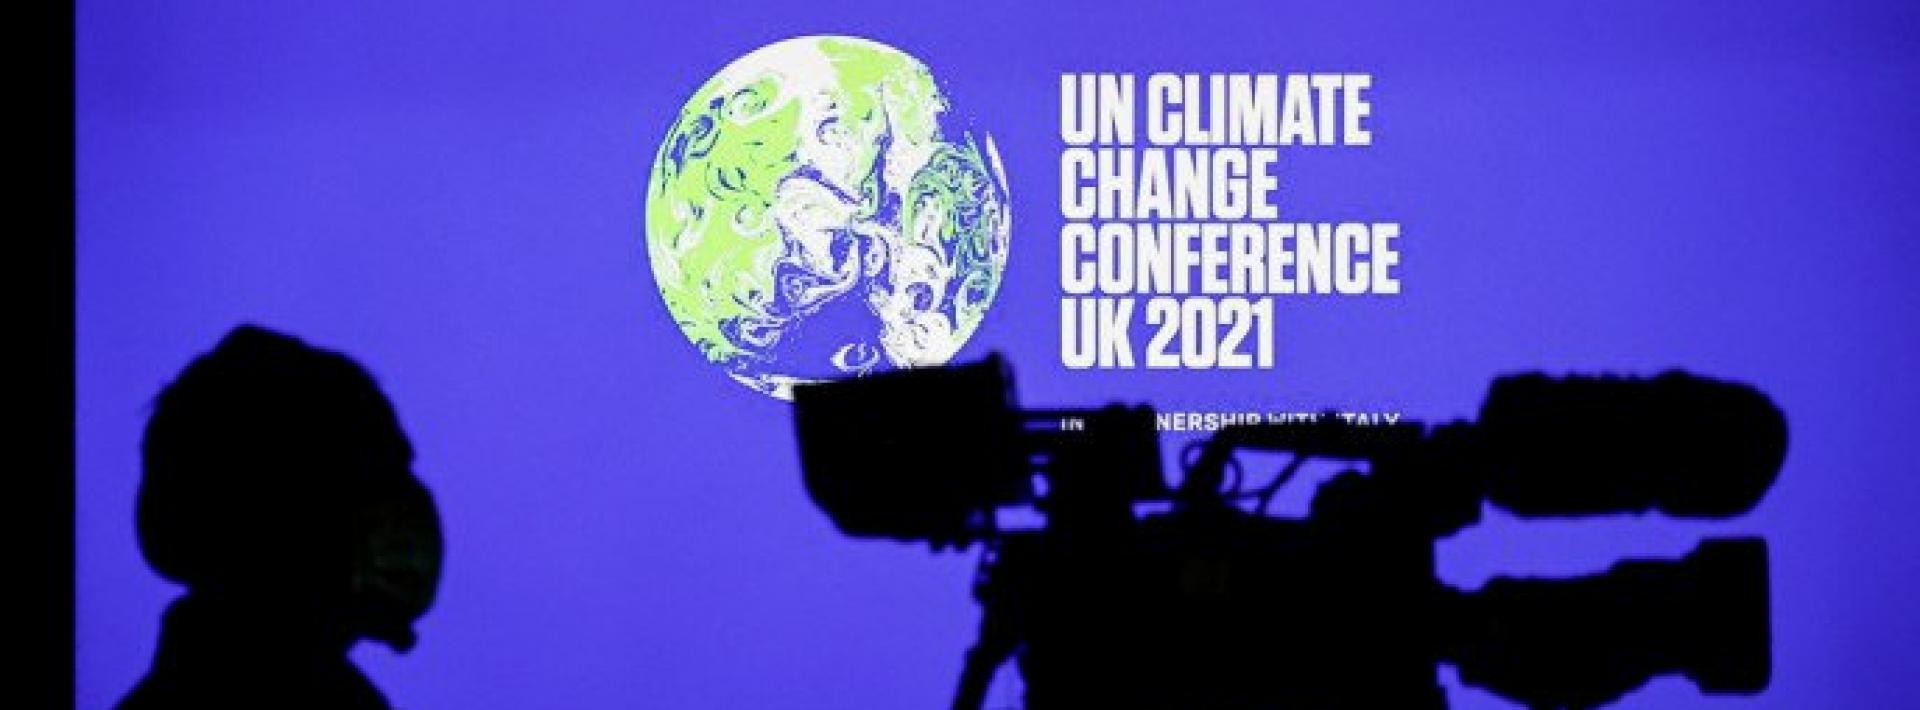 A cameraman sits in front of a screen displaying COP26 logo during a news conference at the UN Climate Change Conference (COP26), in Glasgow, Scotland, Britain, November 5, 2021. Photo : Reuters